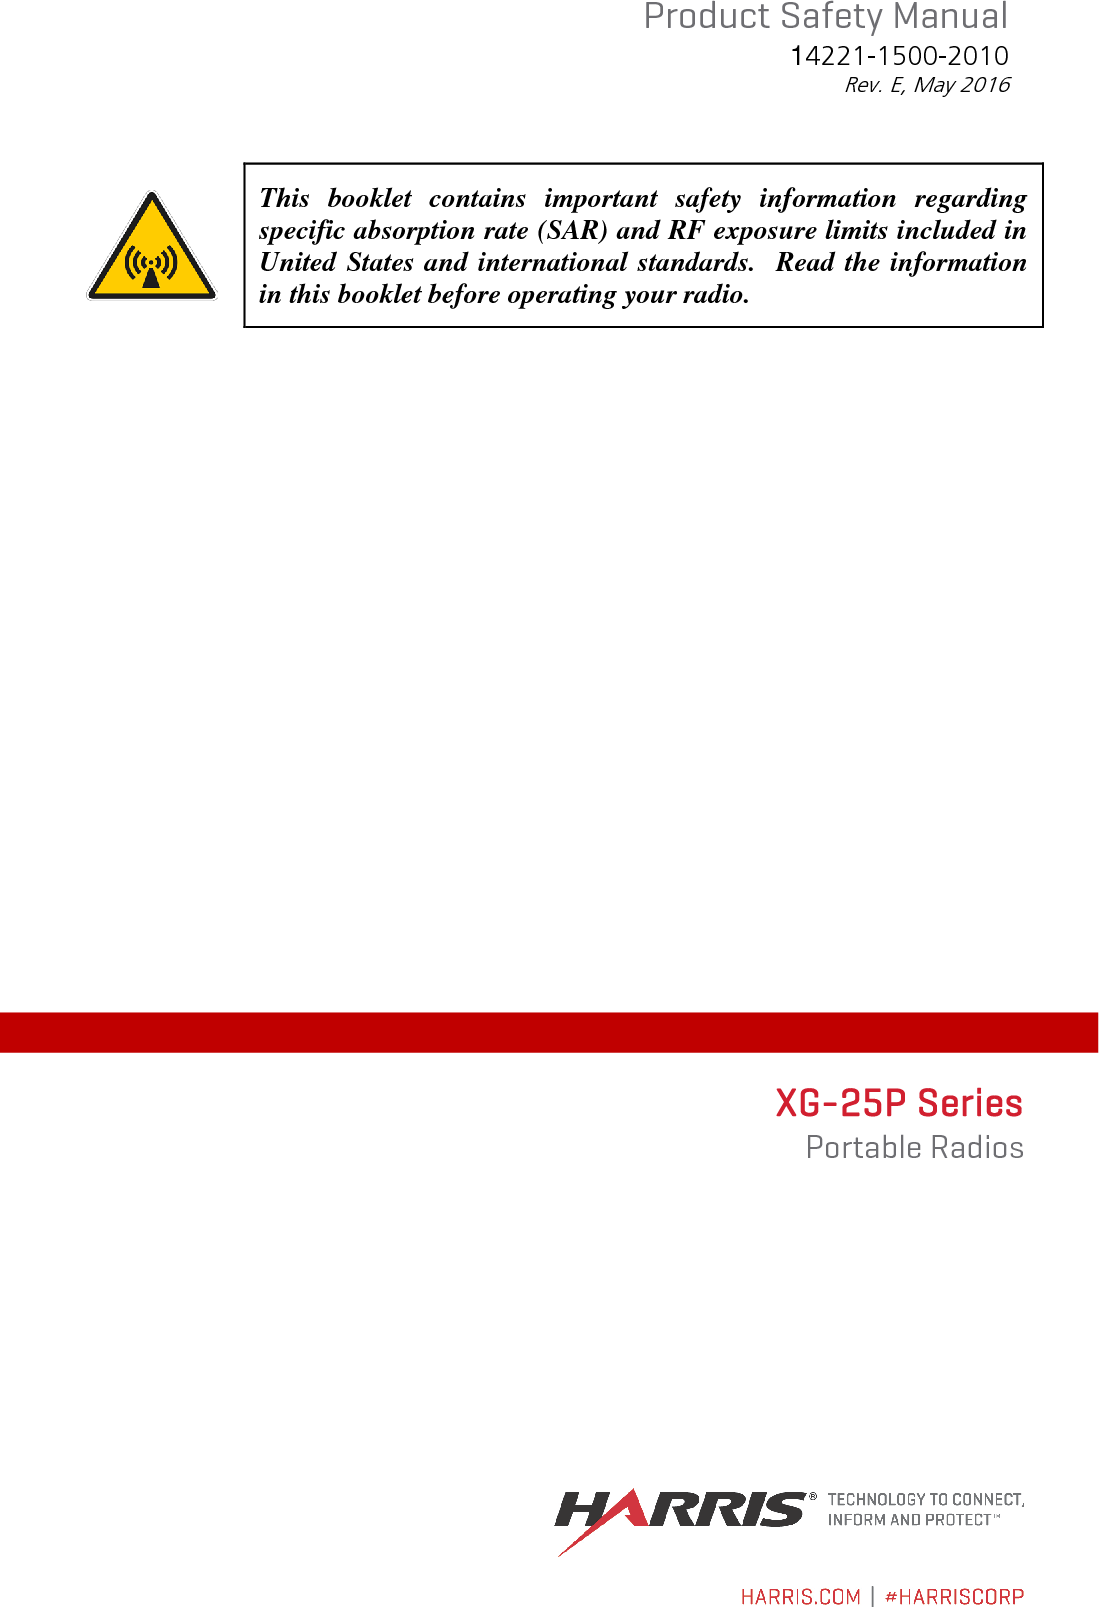  Product Safety Manual 14221-1500-2010 Rev. E, May 2016   This booklet contains important safety information regarding specific absorption rate (SAR) and RF exposure limits included in United States and international standards.  Read the information in this booklet before operating your radio. XG-25P Series Portable Radios 